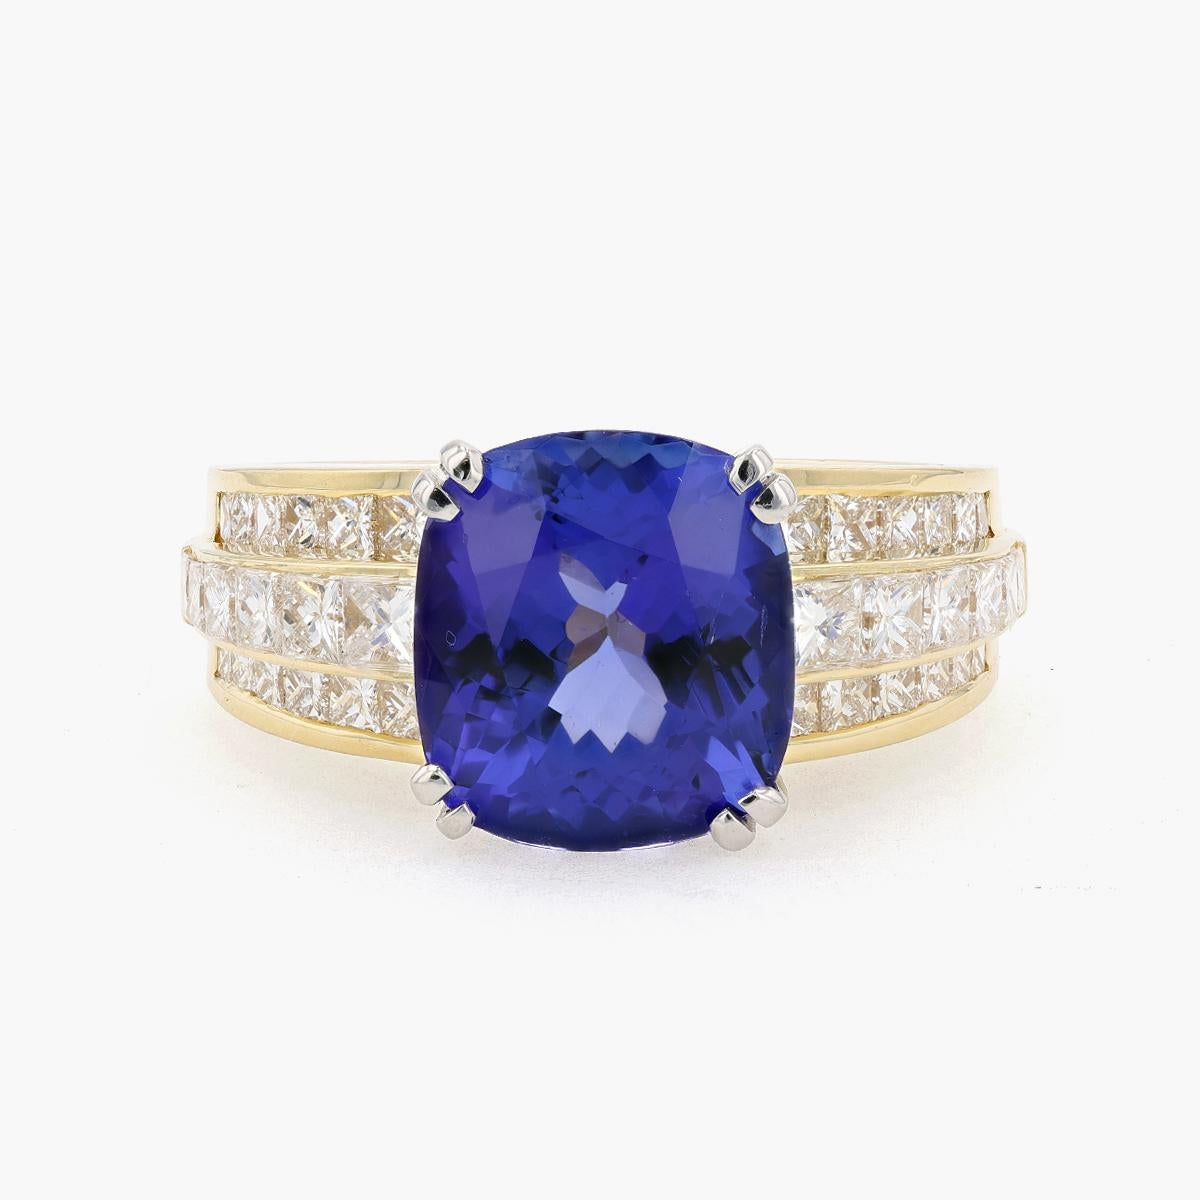 Platinum and 18K Yellow Gold Tanzanite and Diamond ring. This ring features a cushion cut Tanzanite stone weighing 6.35 carats and 32 princess cut diamonds weighing 2.06 carats.  F-G in color VVS in clarity. Ring is size 10. 

Though commonly